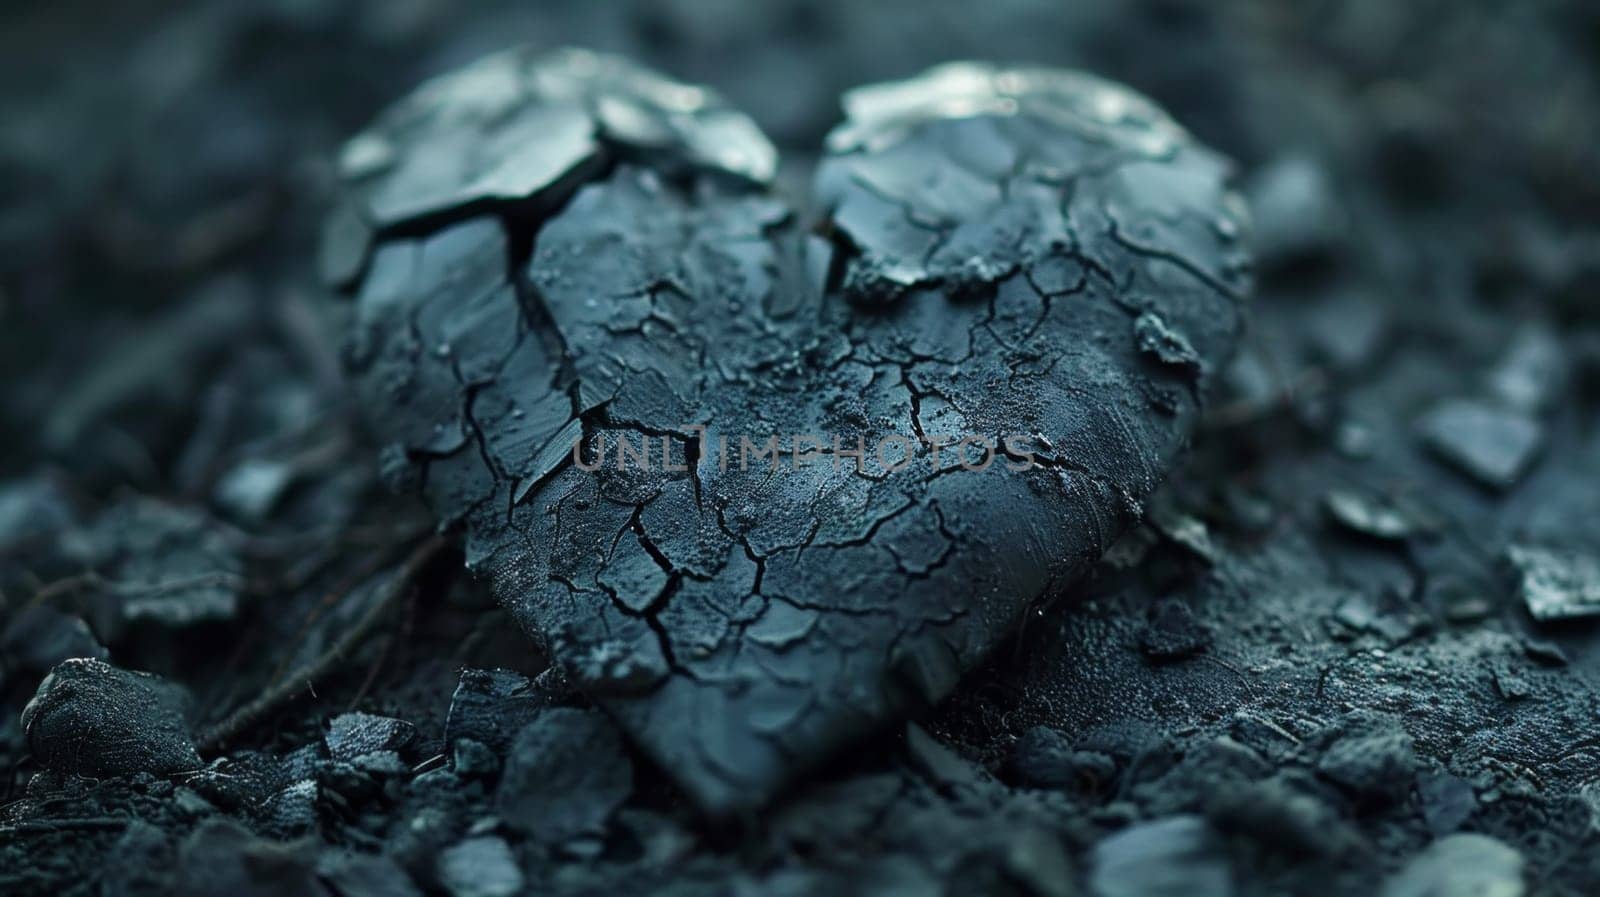 A broken heart is sitting on the ground in a dark area